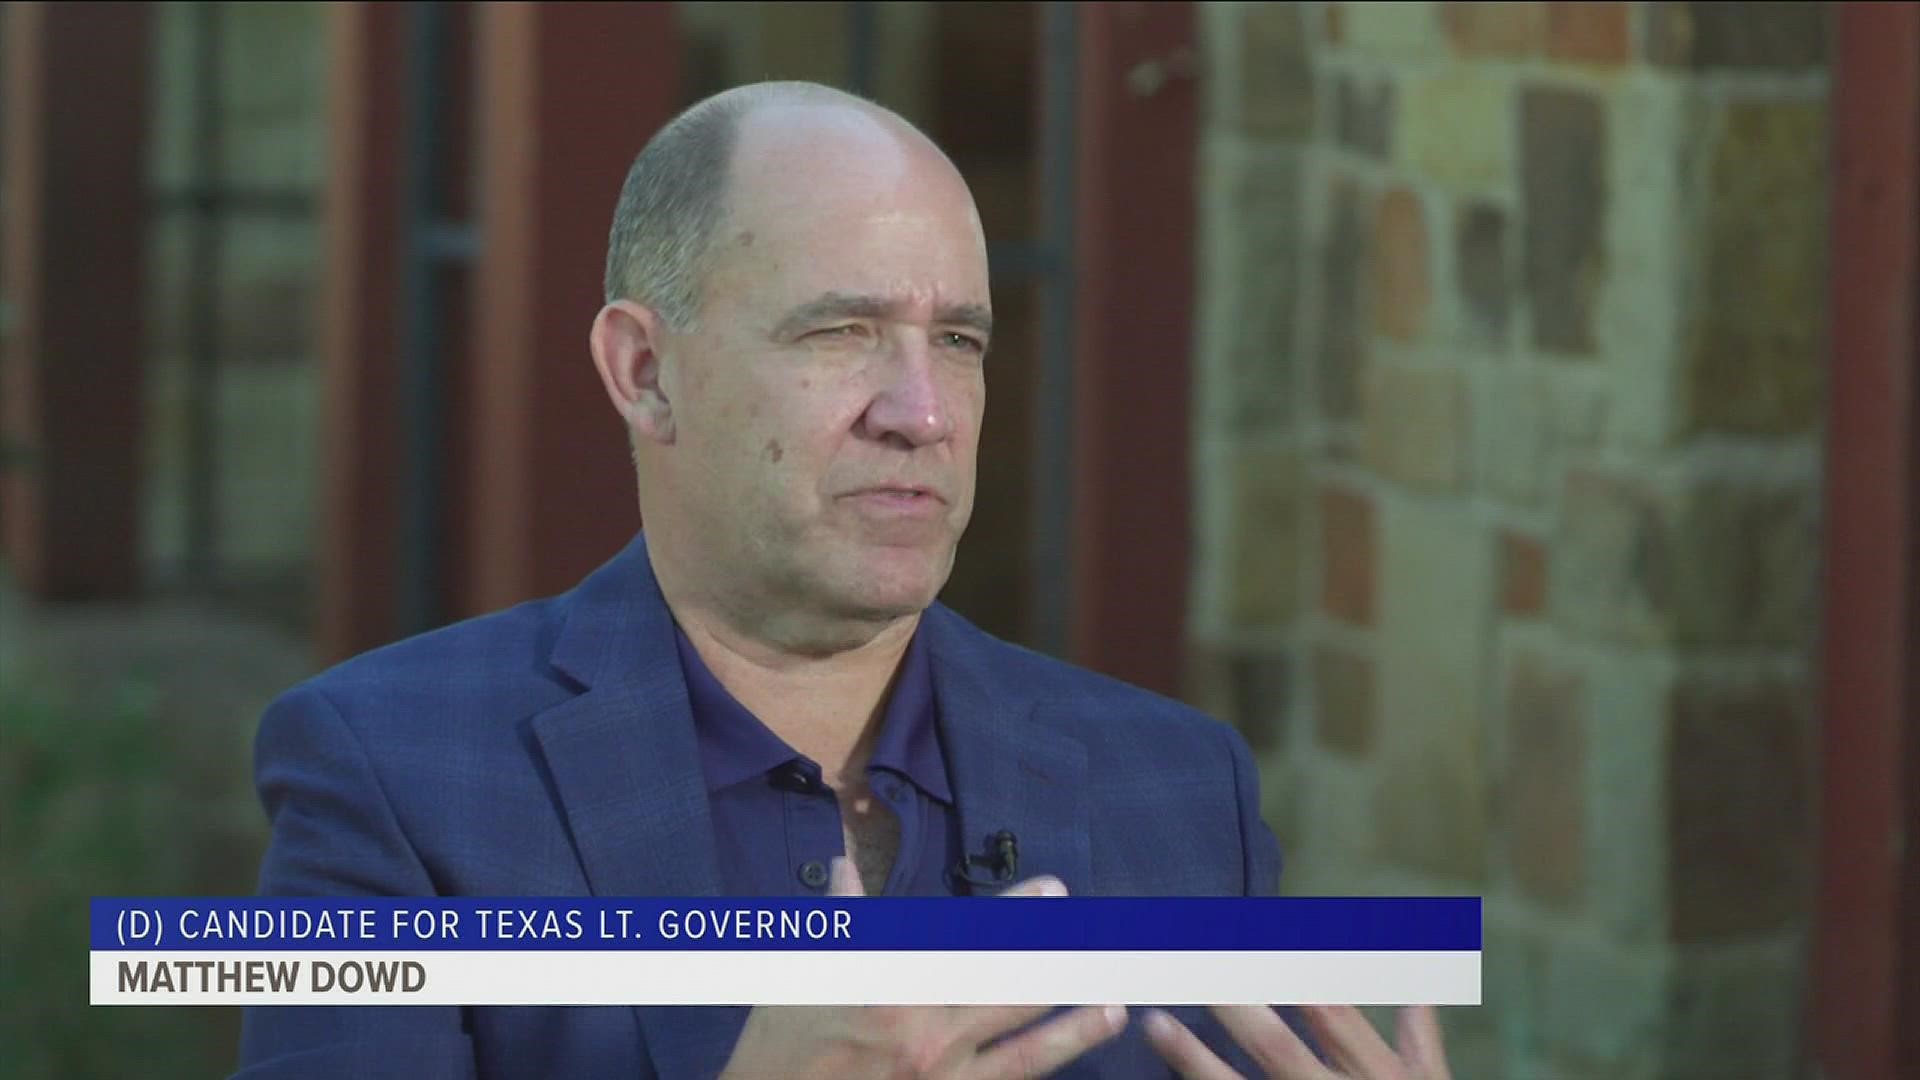 Matthew Dowd spoke to Inside Texas Politics about fixing the issues he believes Texans are facing.